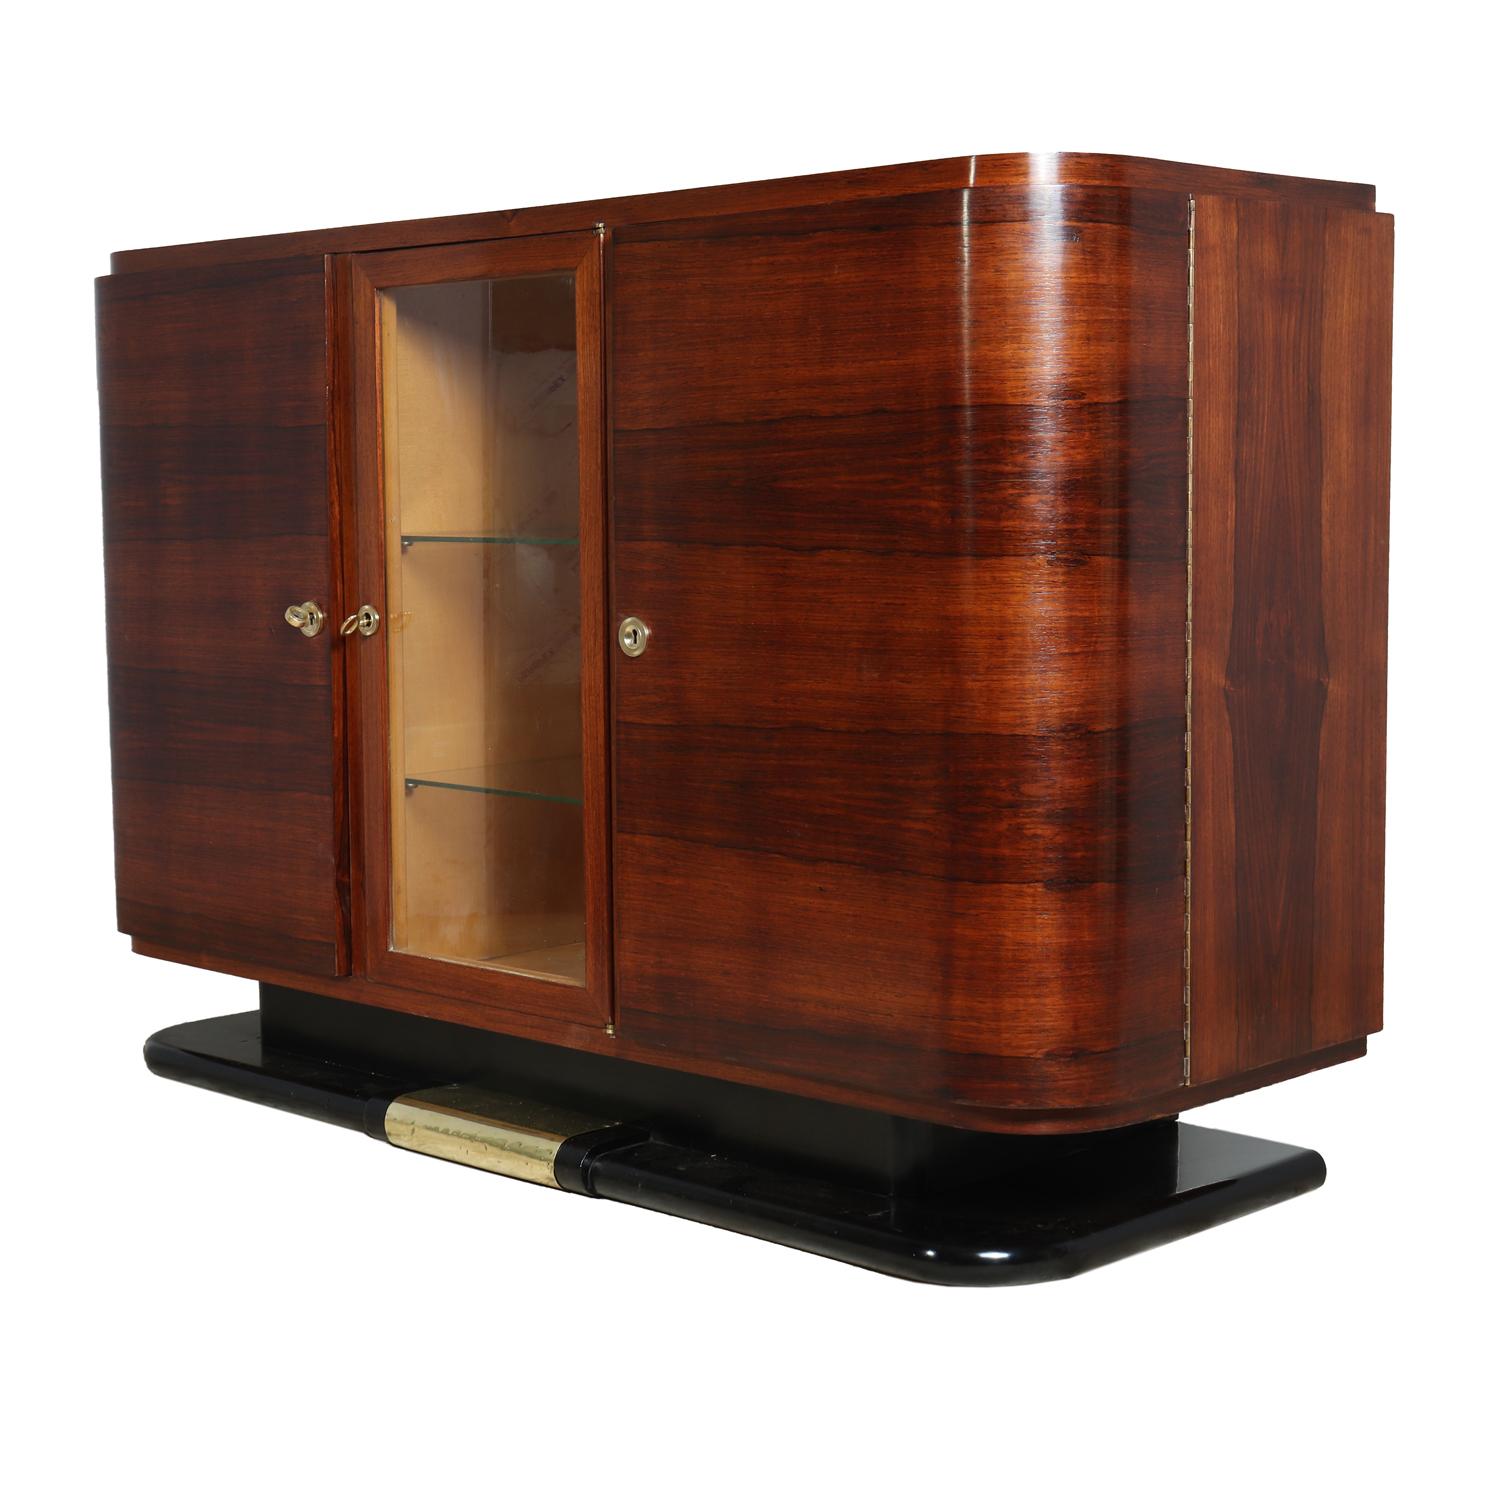 Mid-20th Century French Art Deco Sideboard in Rosewood, circa 1930